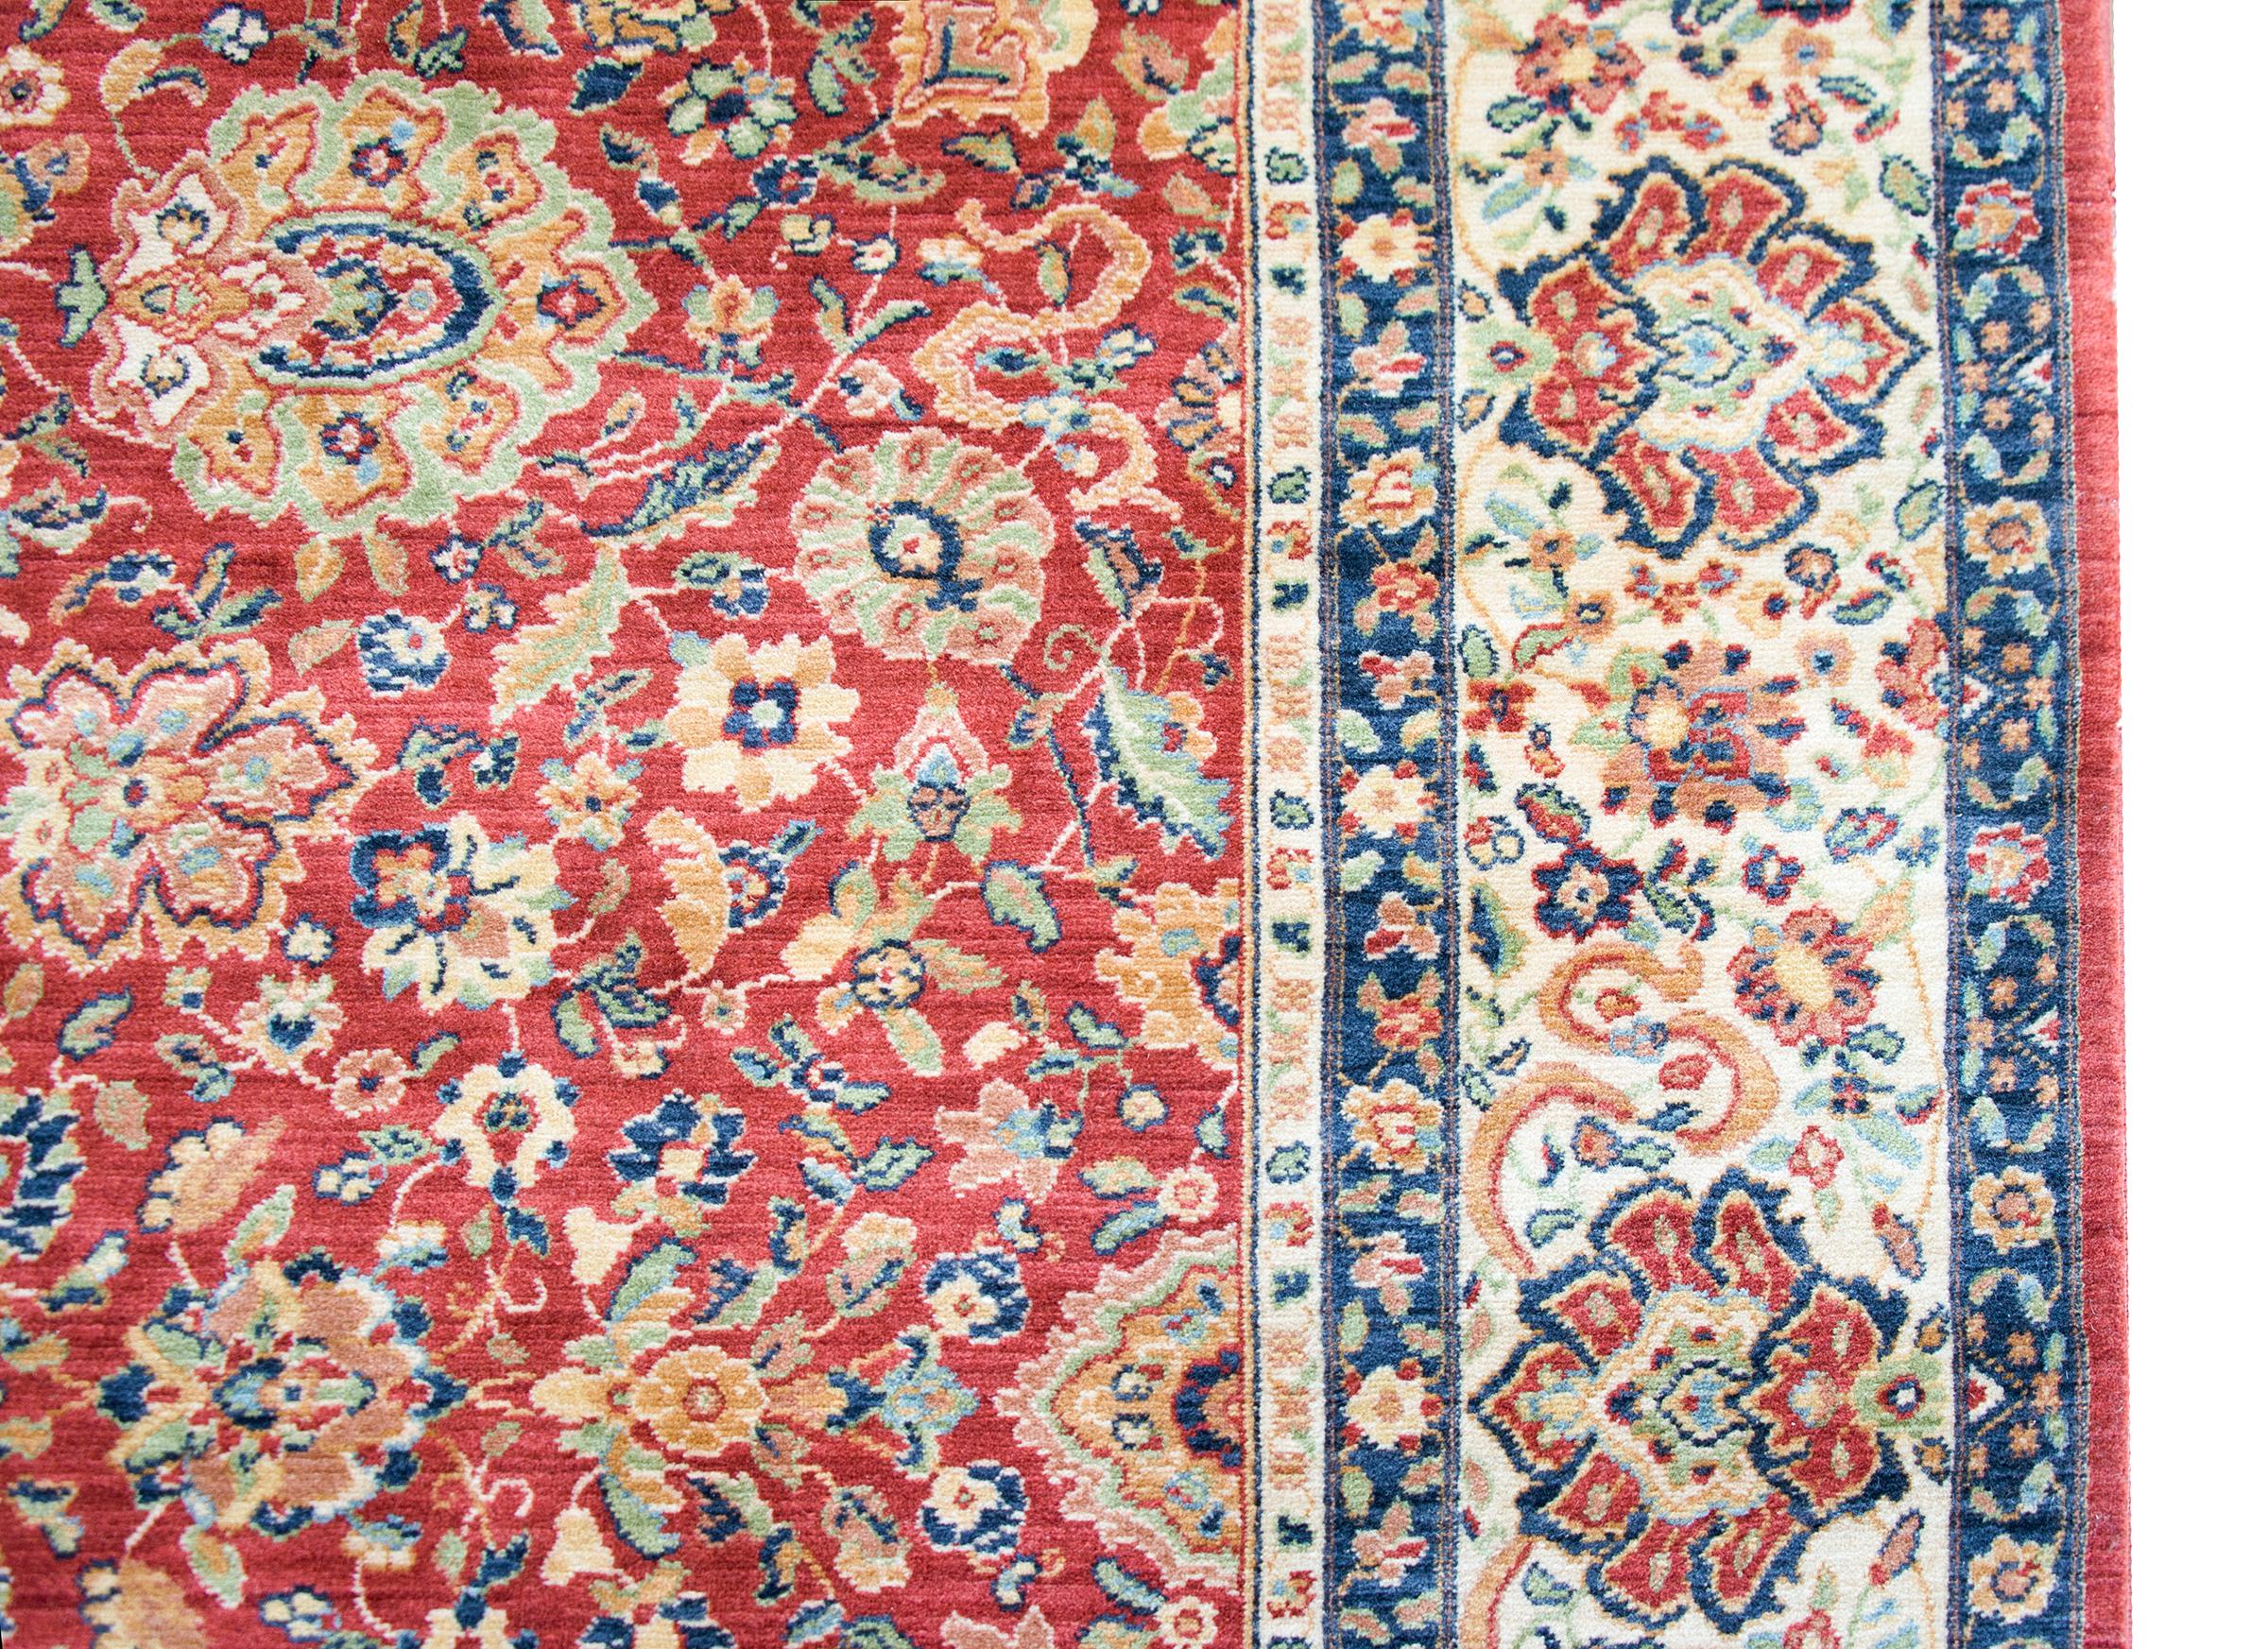 Late 20th Century Karastan Mahal-Style Rug In Good Condition For Sale In Chicago, IL